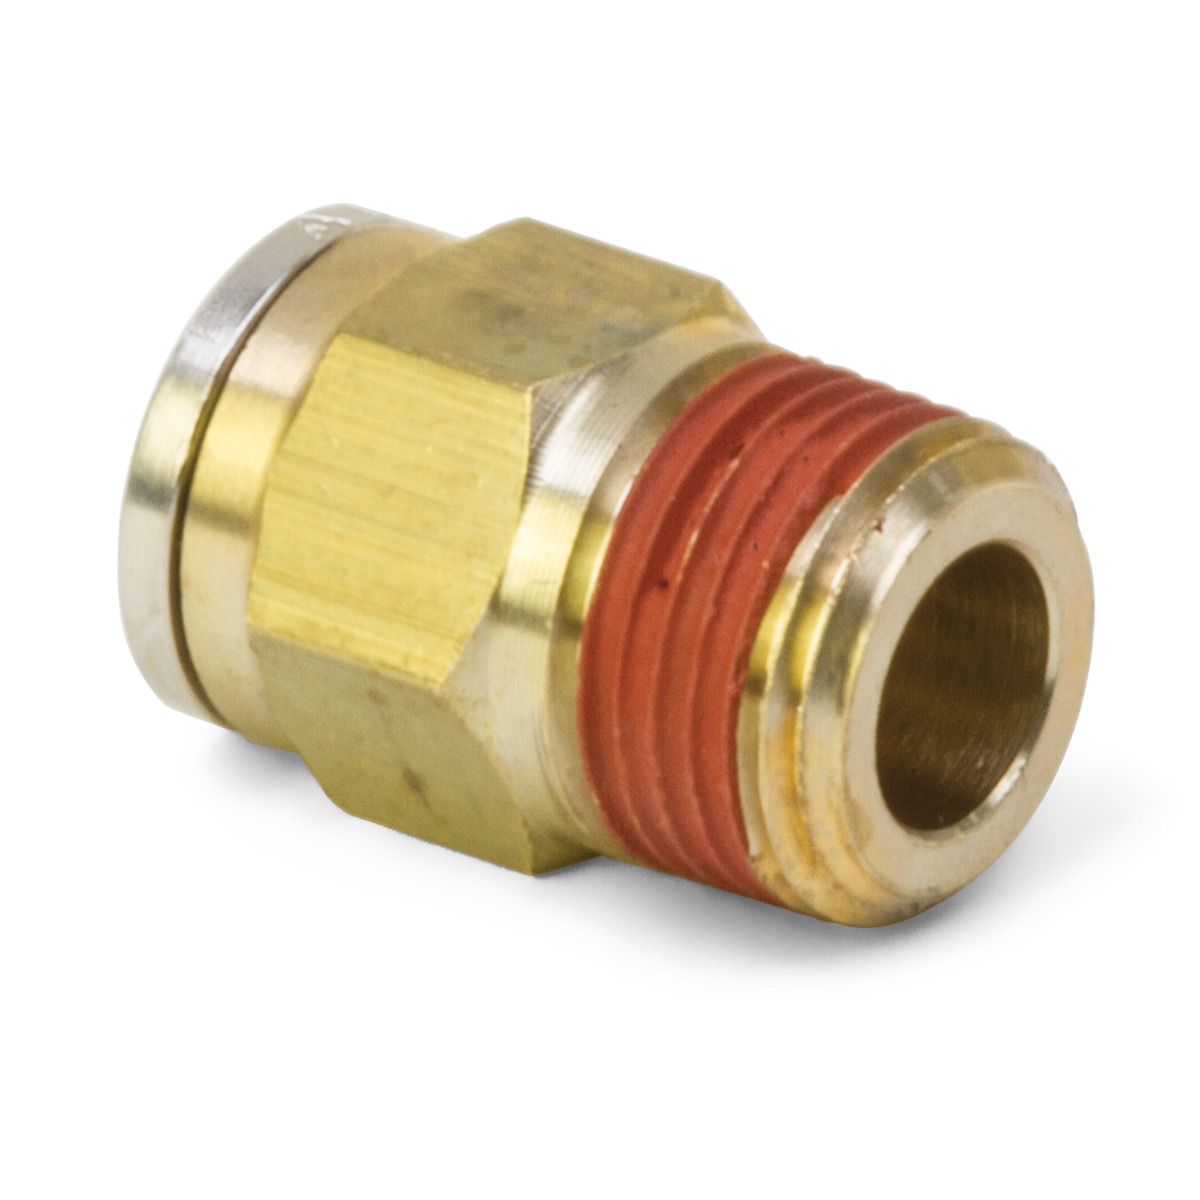 M12 x 3/8 DOT Male Connector - Kimball Midwest